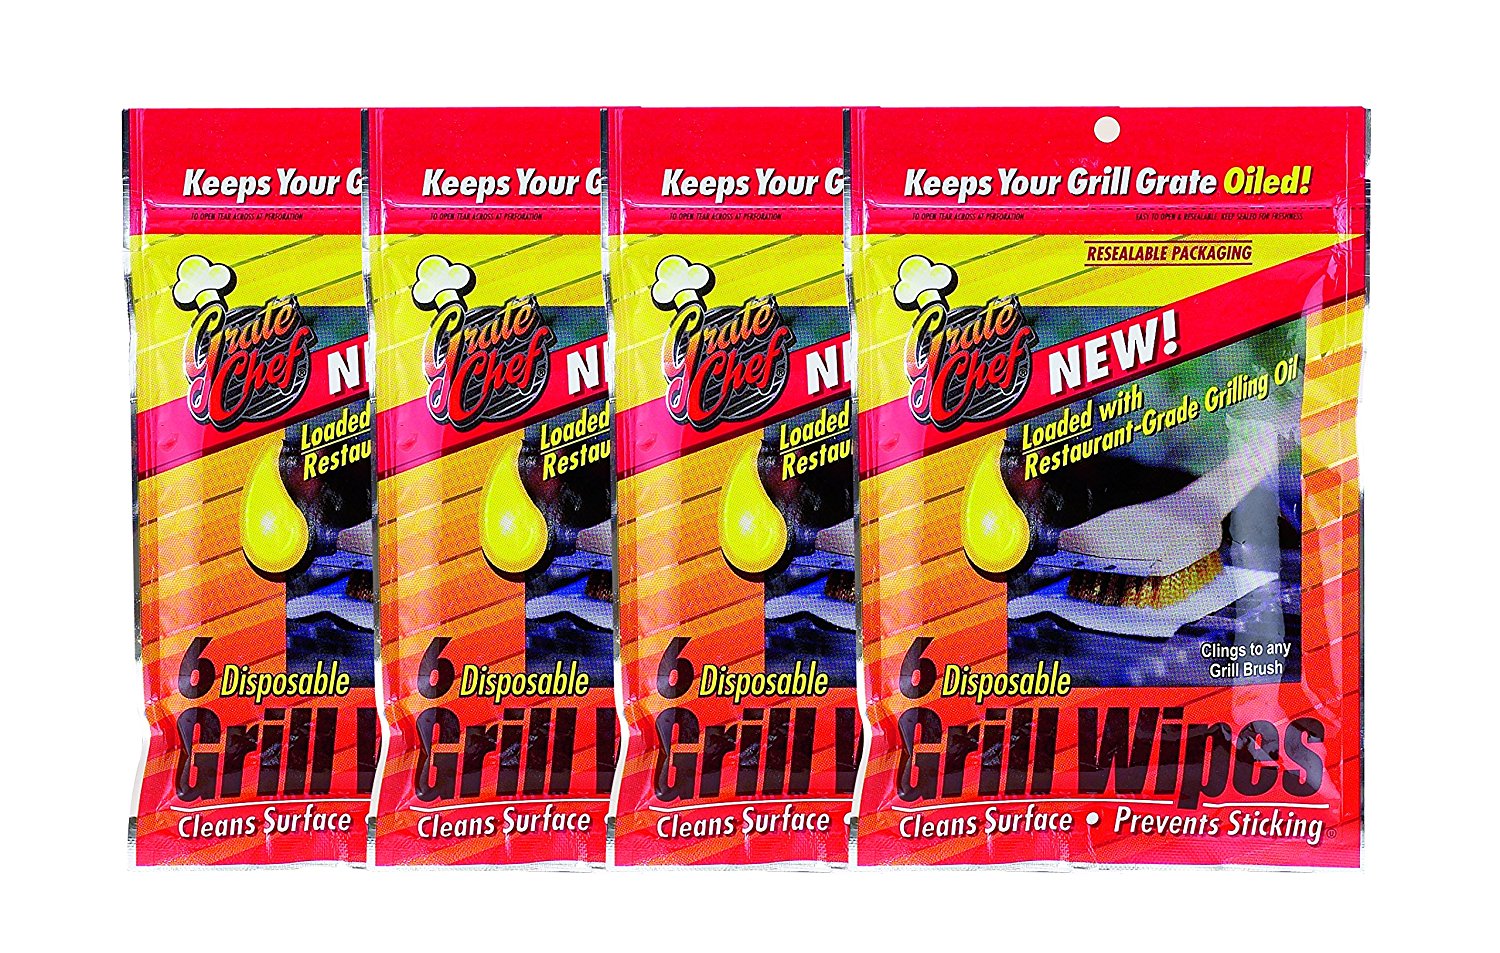 Grill Grate Oil For Grilling and Cleaning Wipes - 24 pack